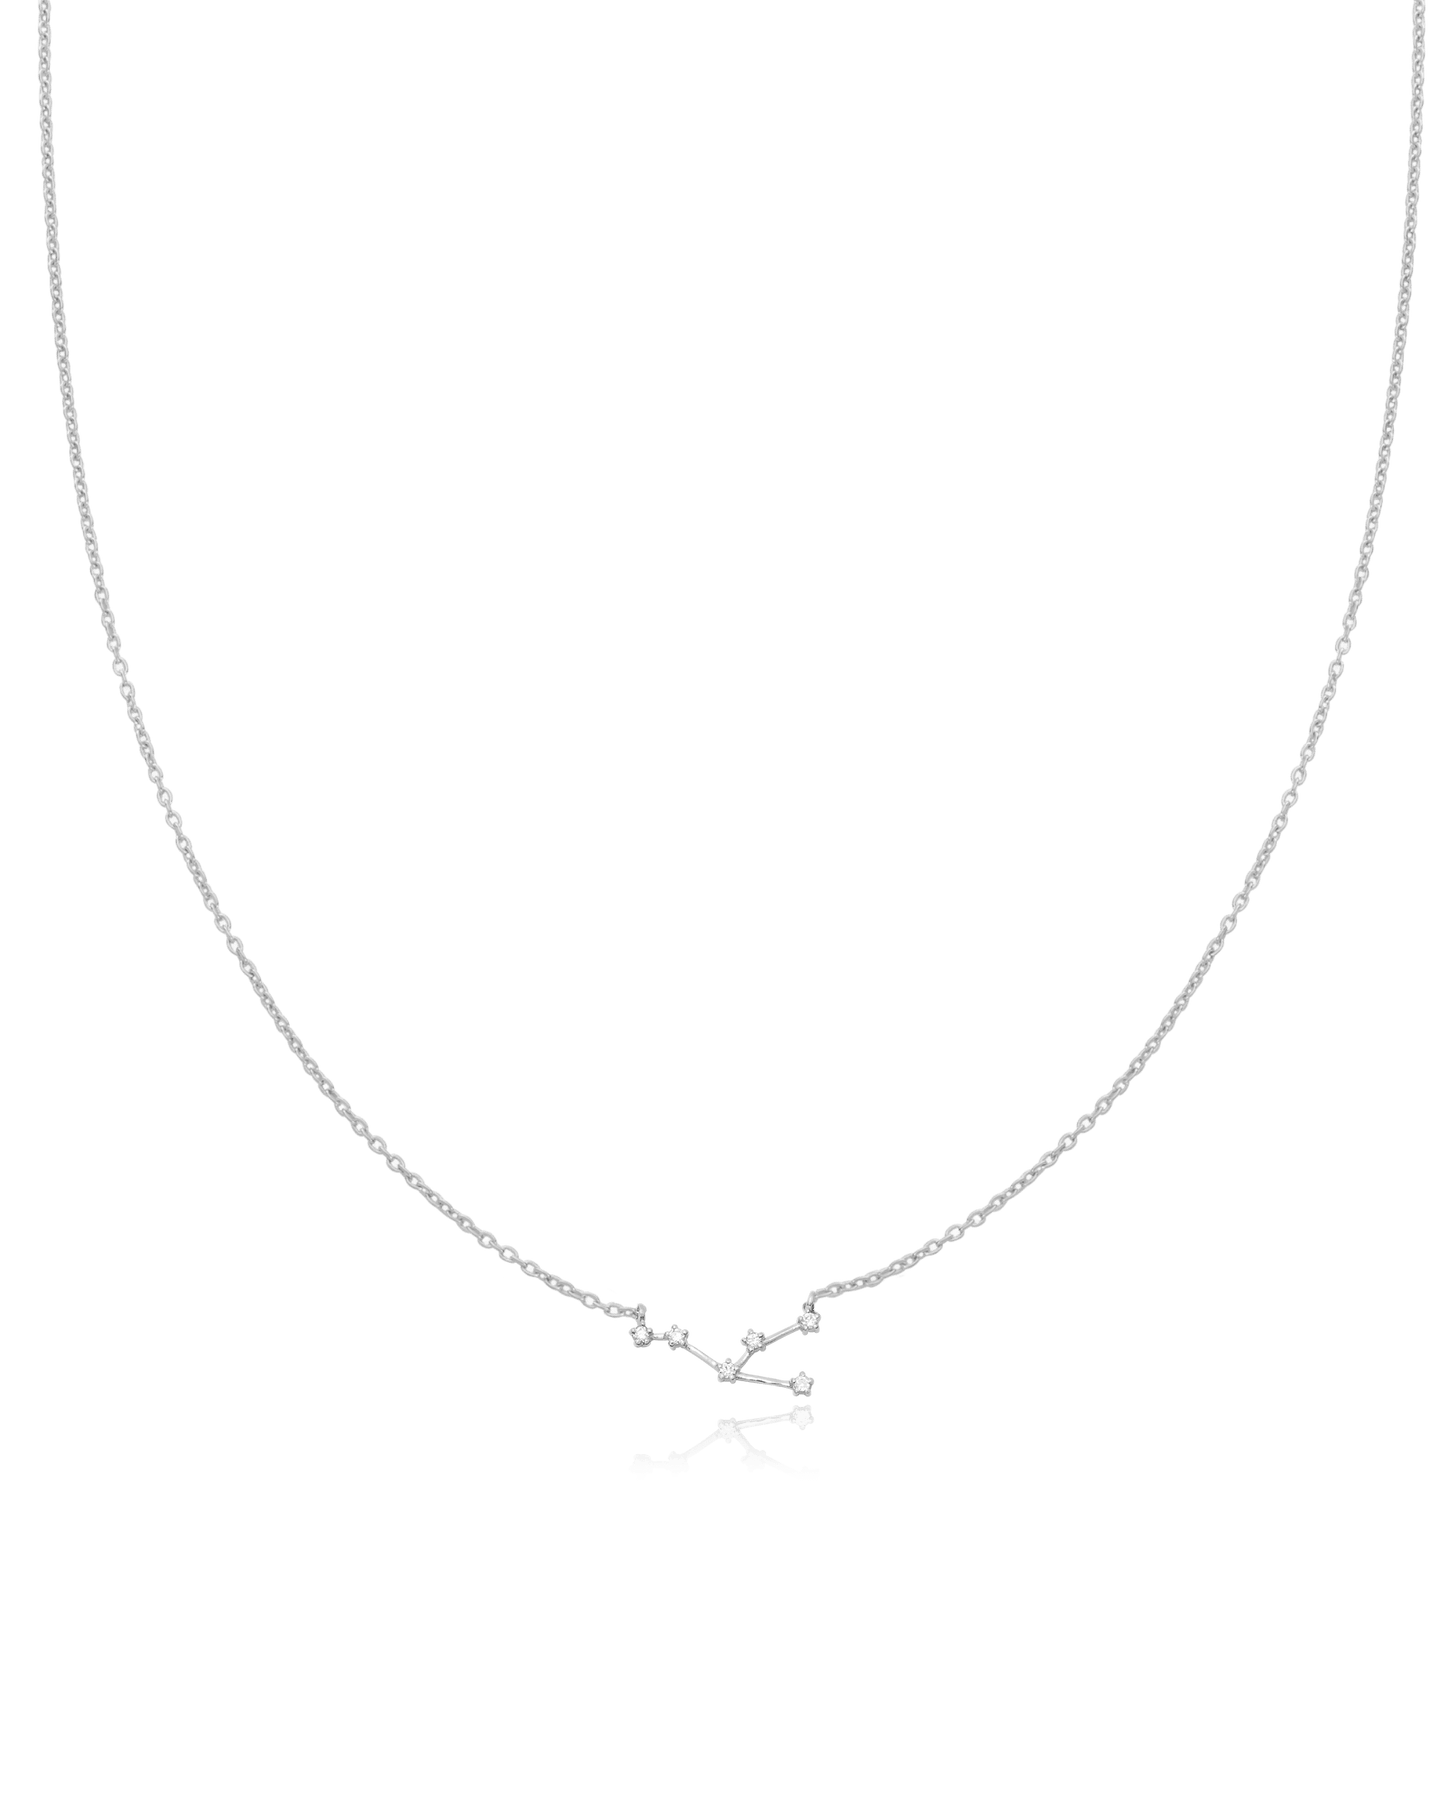 Taurus Constellation Necklace - 925 Sterling Silver Necklaces magal-dev 16" 